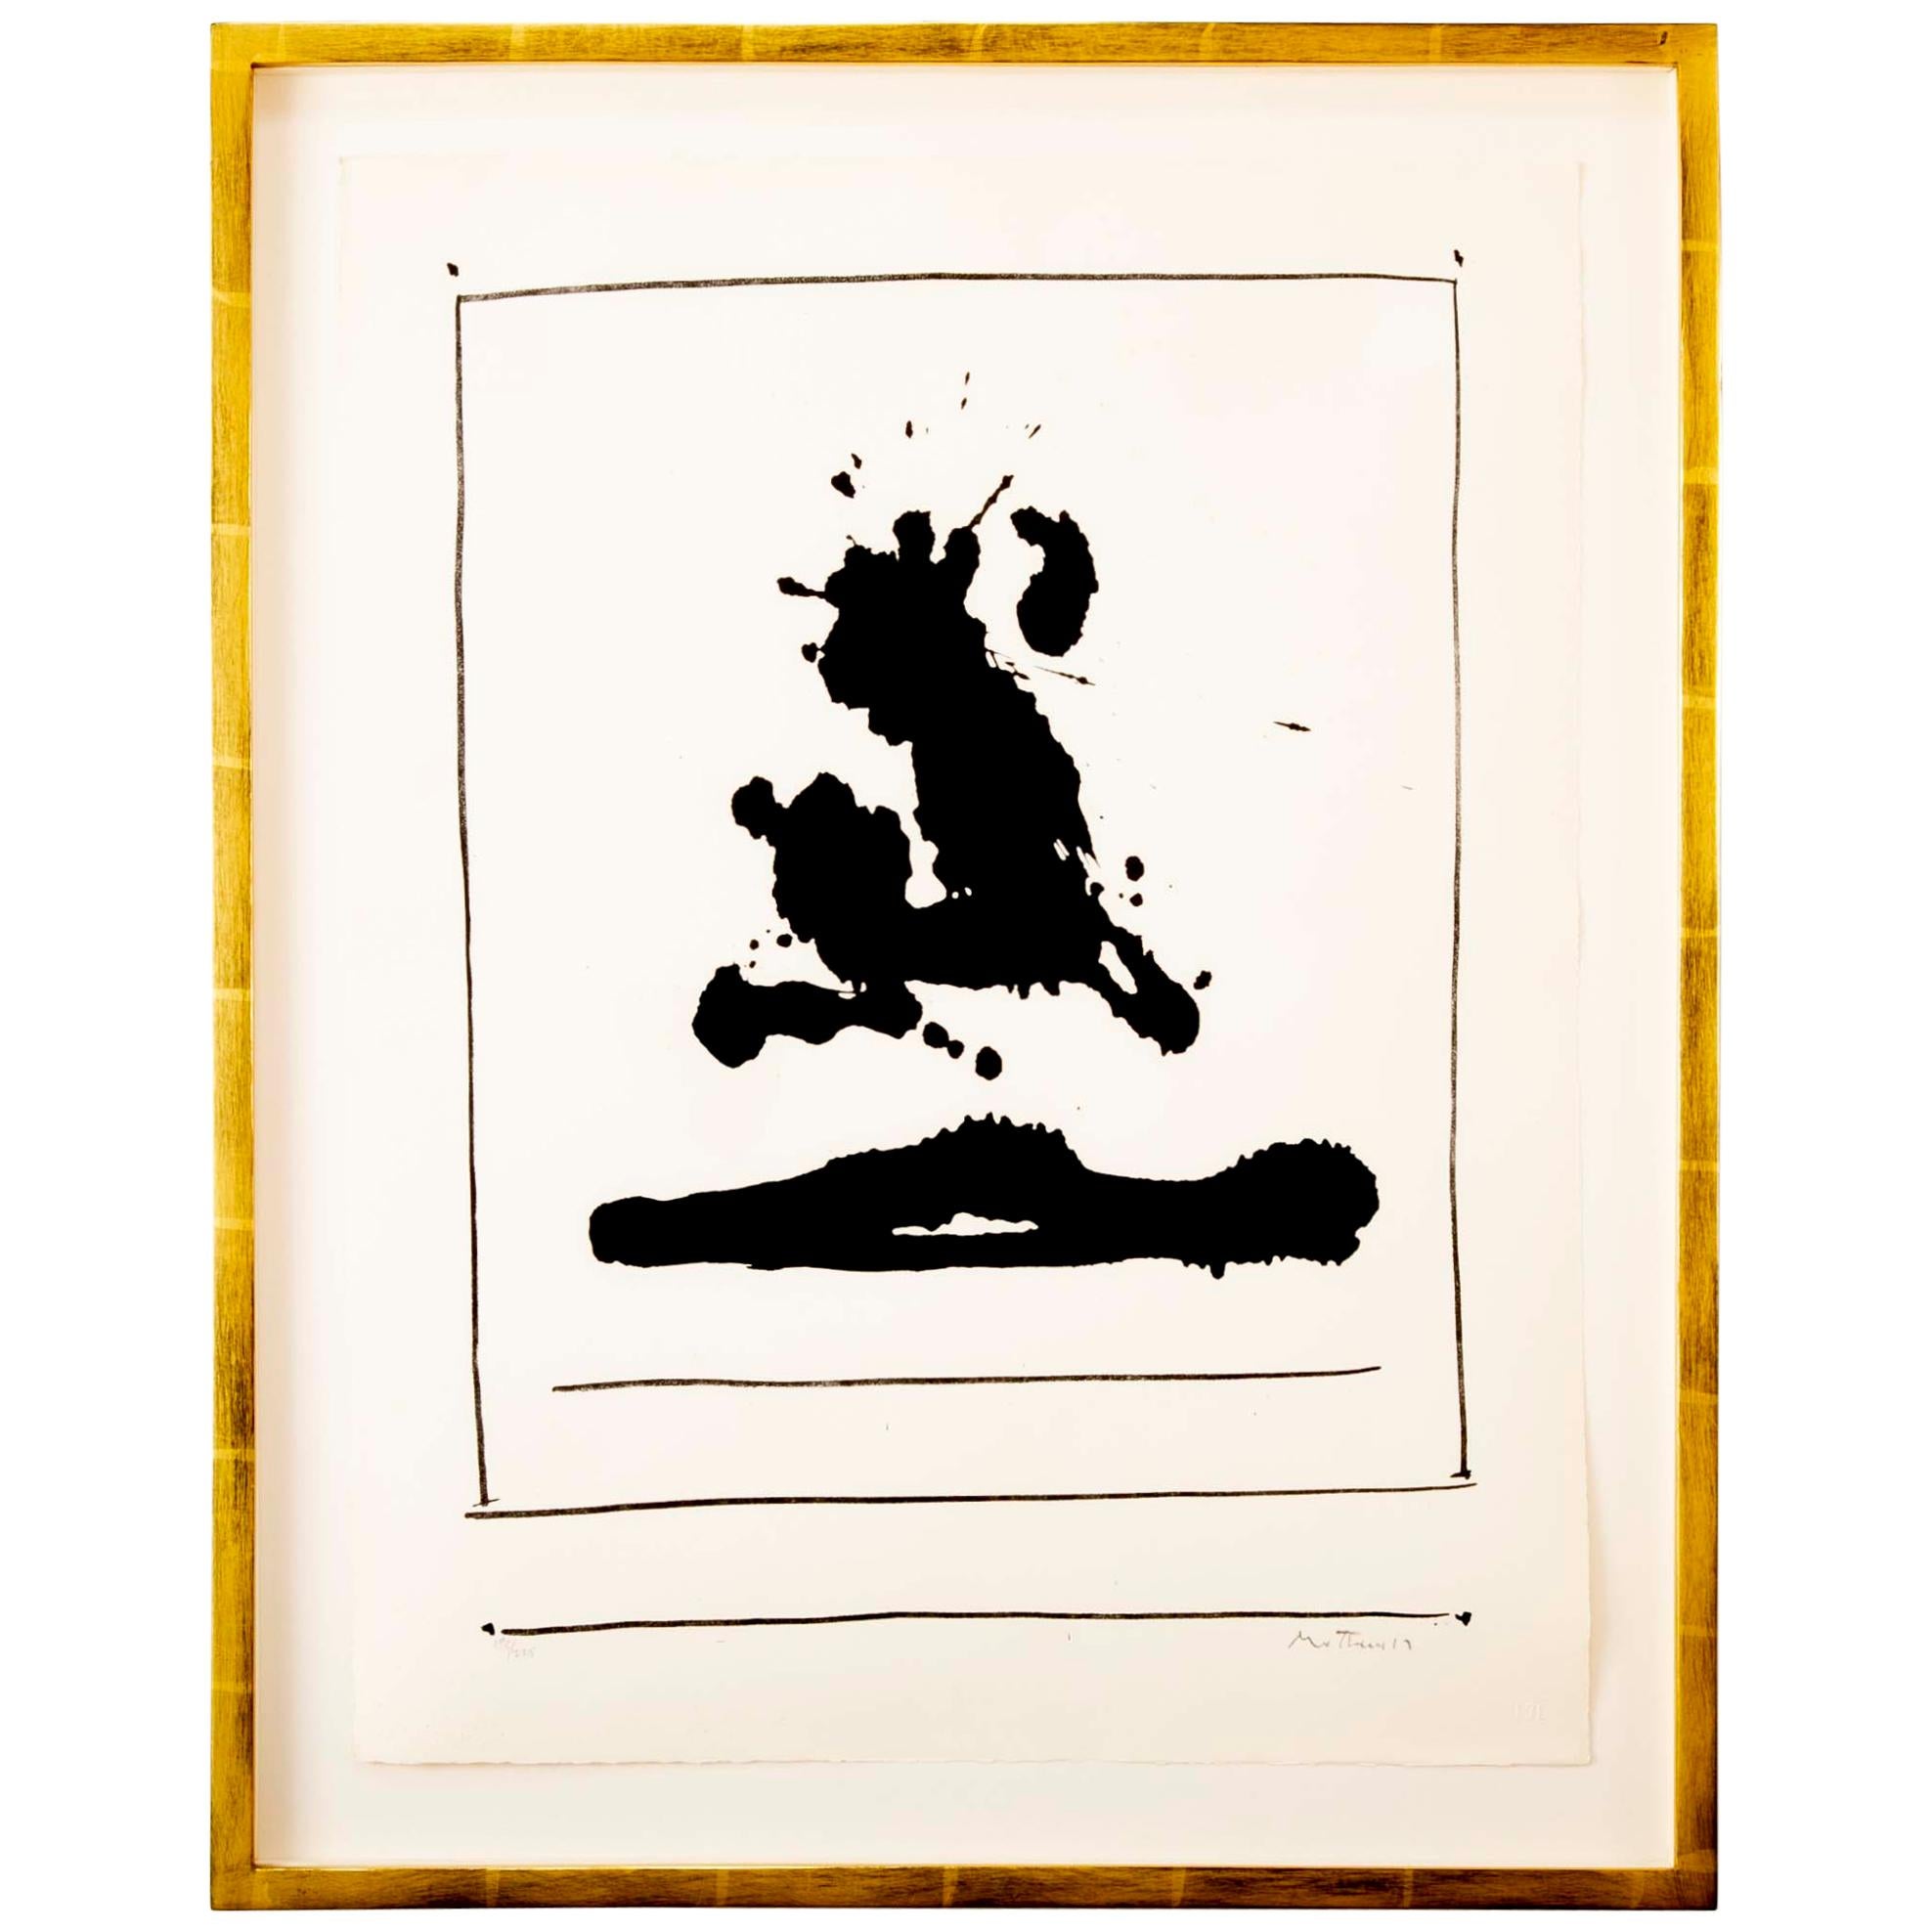 Robert Motherwell, Untitled Lithograph on Arches Paper